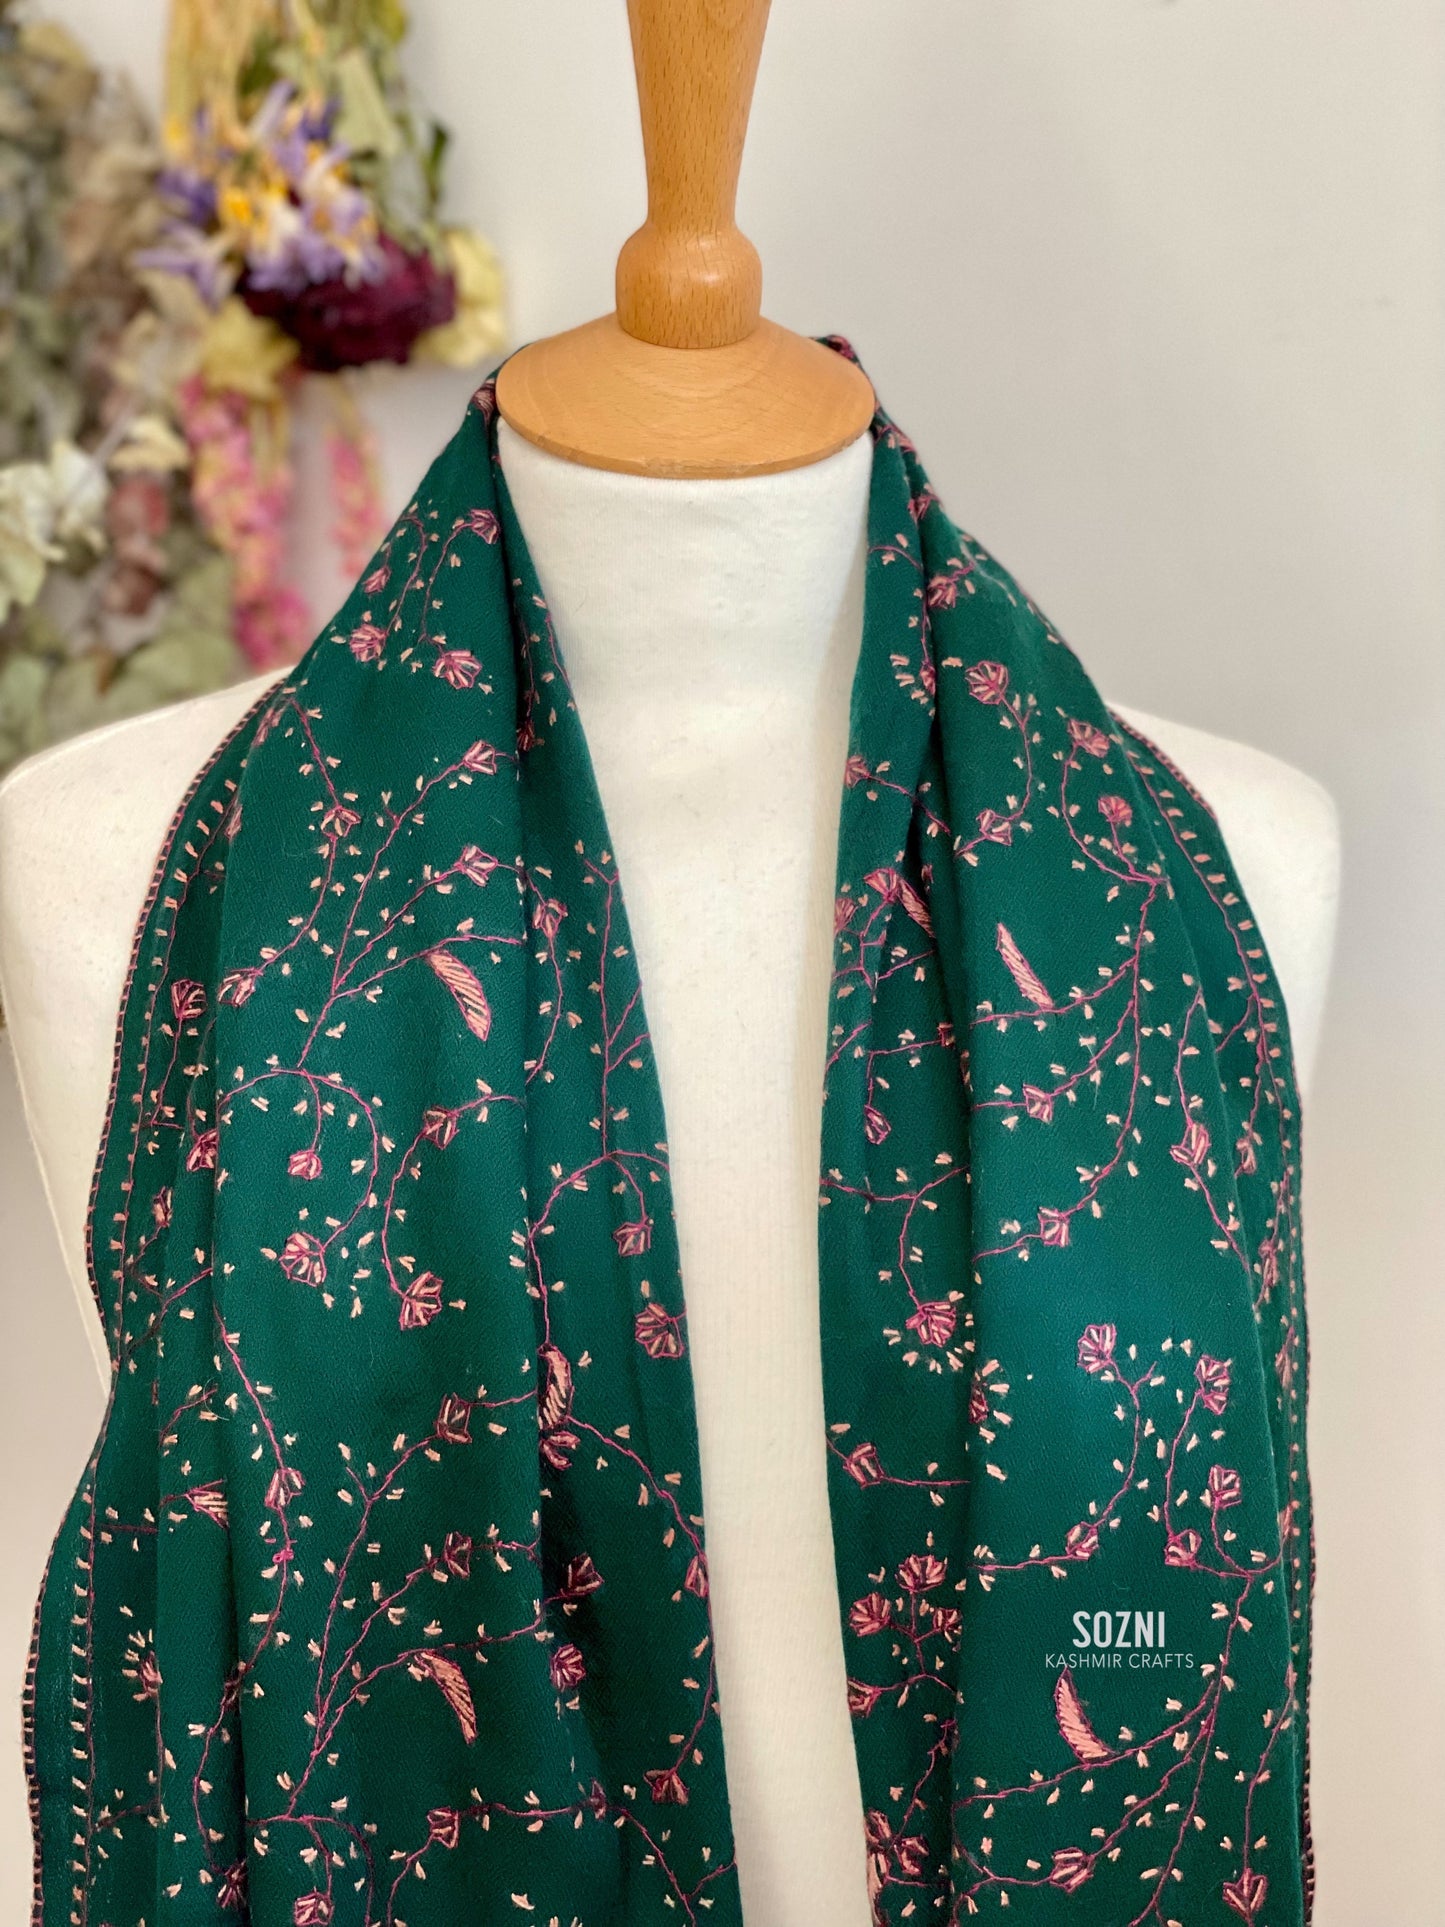 Forest Green Wool Embroidery (Jali) Stole